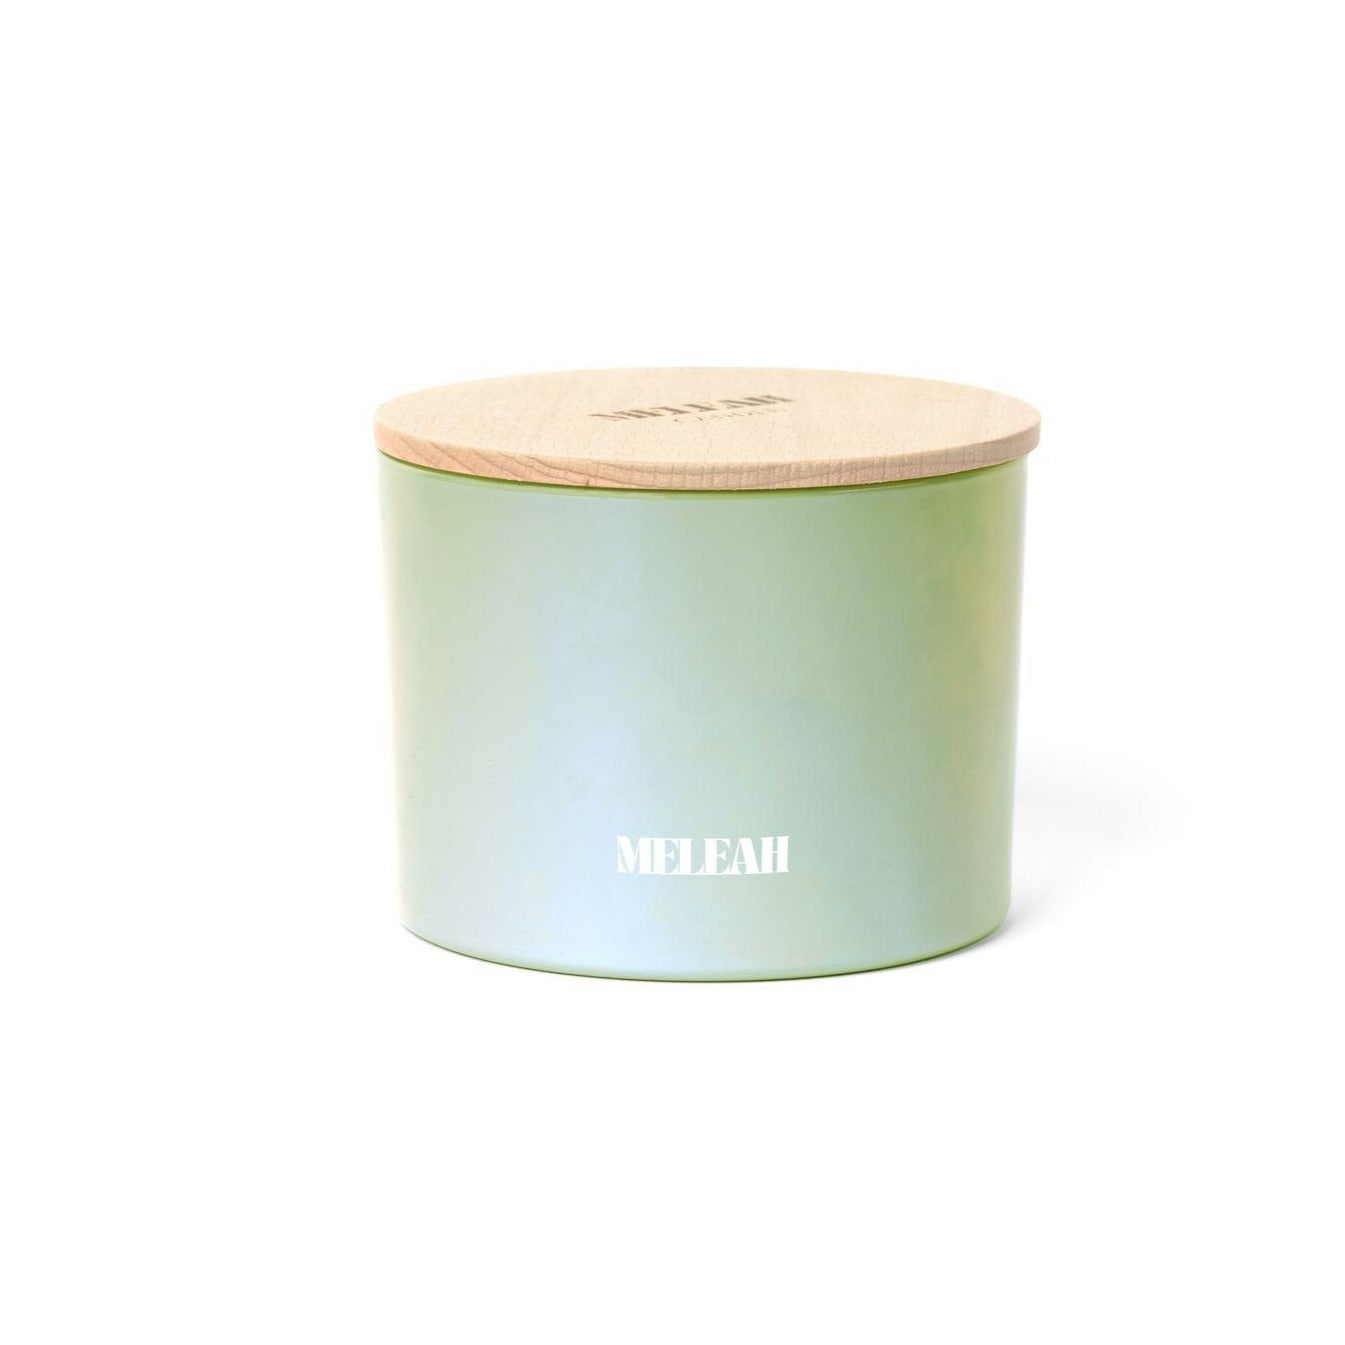 Meleah Cactus Blossom Scented Candle for Home and Spa, Natural Soy Wax Candles Scented with Cucumber and Woody Musk in Decorative Glass Jars